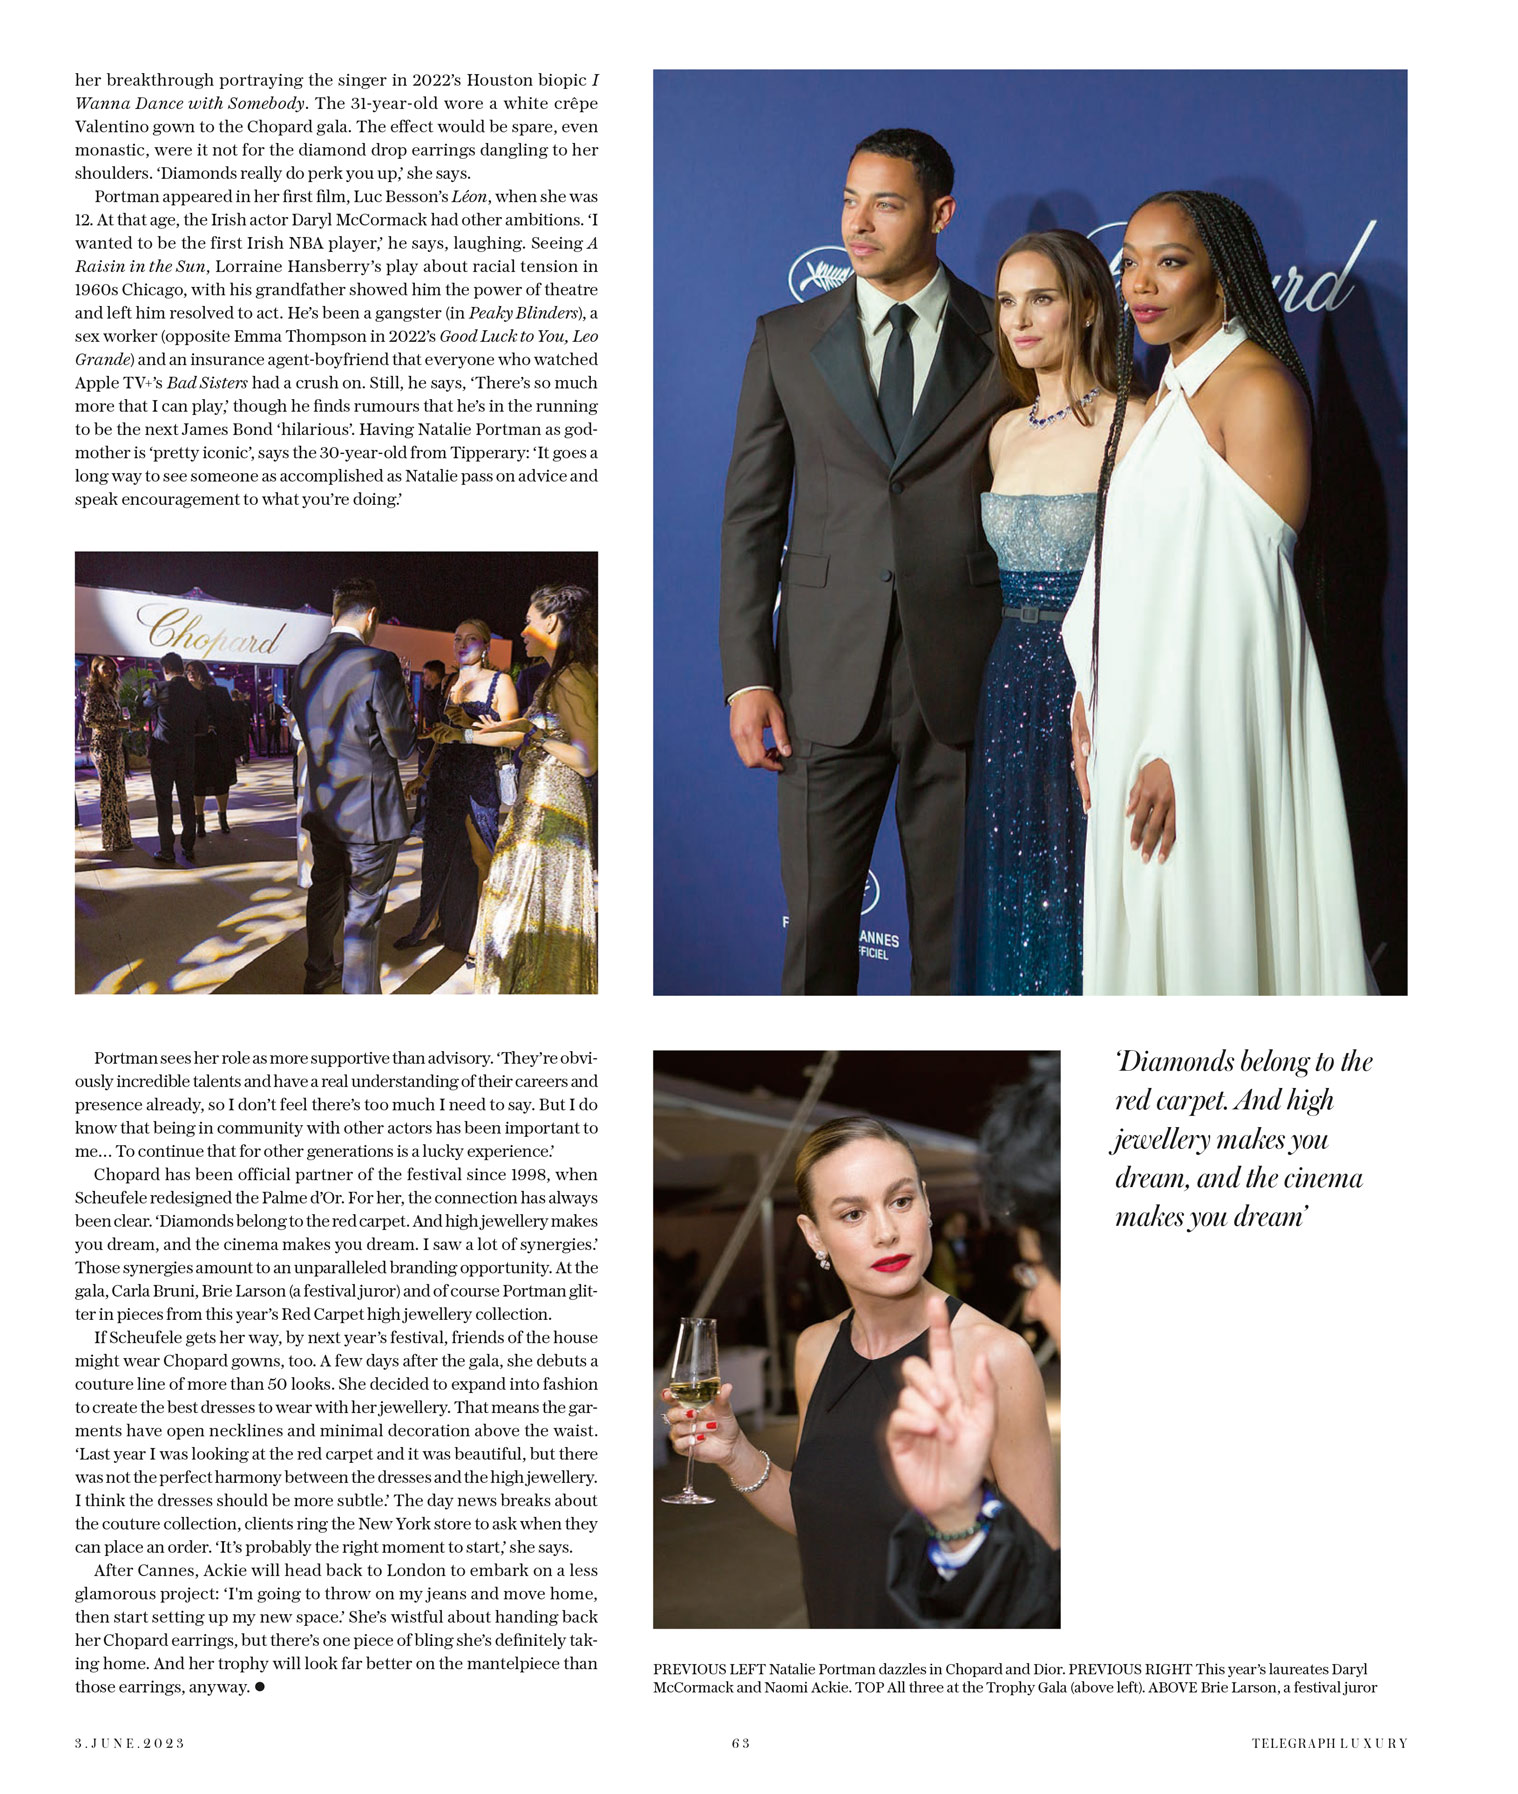 Tearsheet from Telegraph Luxury Magazine, showing 3 photographs and text